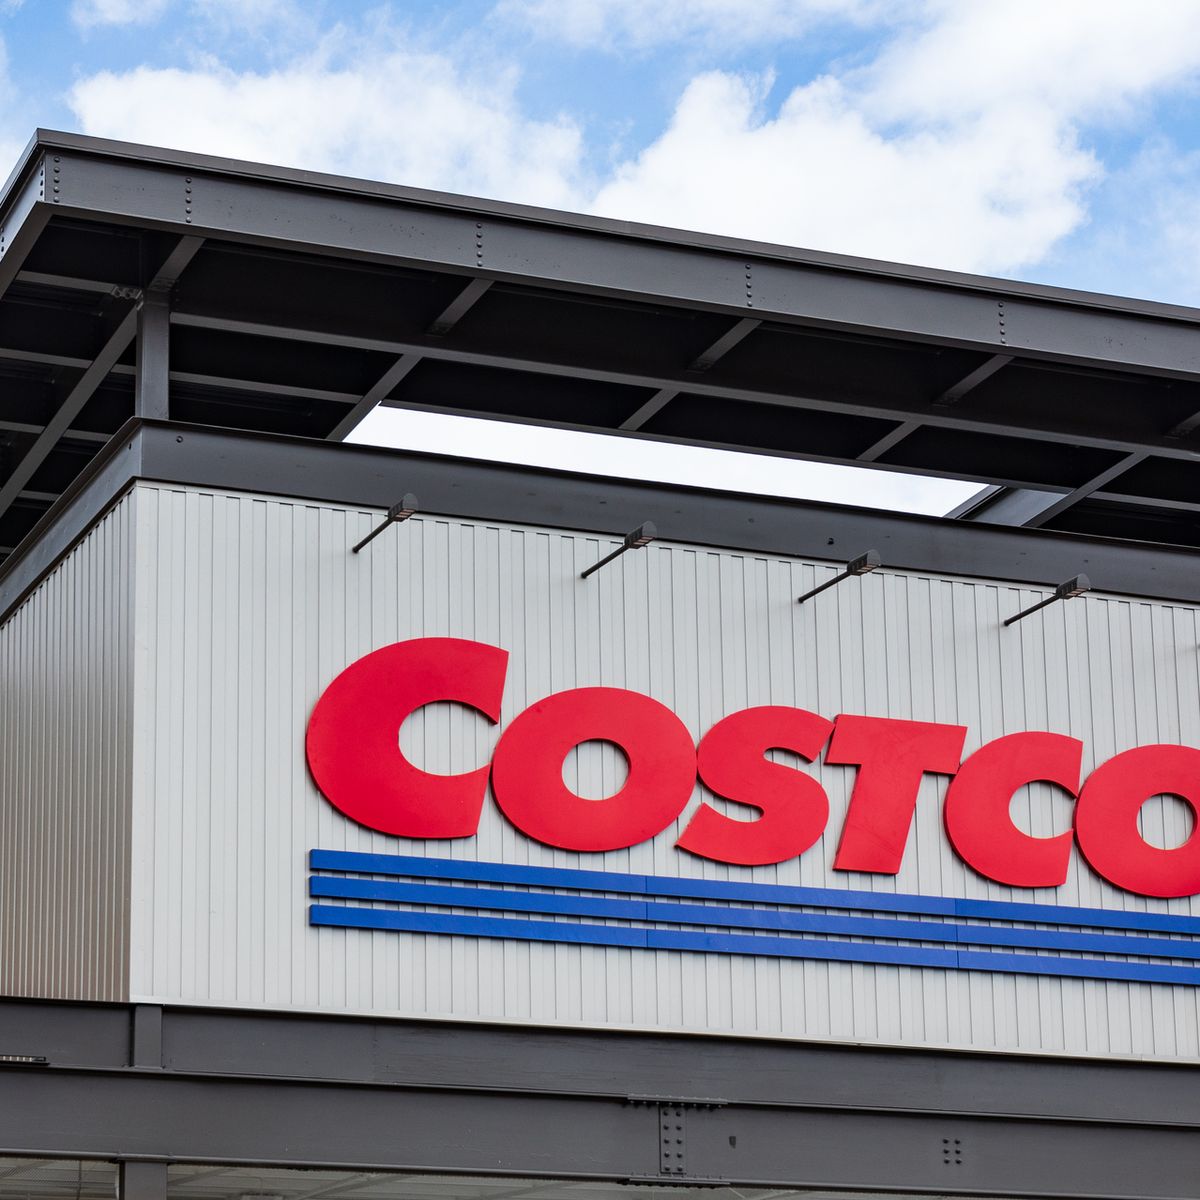 Costco Issuing Refunds for Kirkland Vodka After Customer Complaints